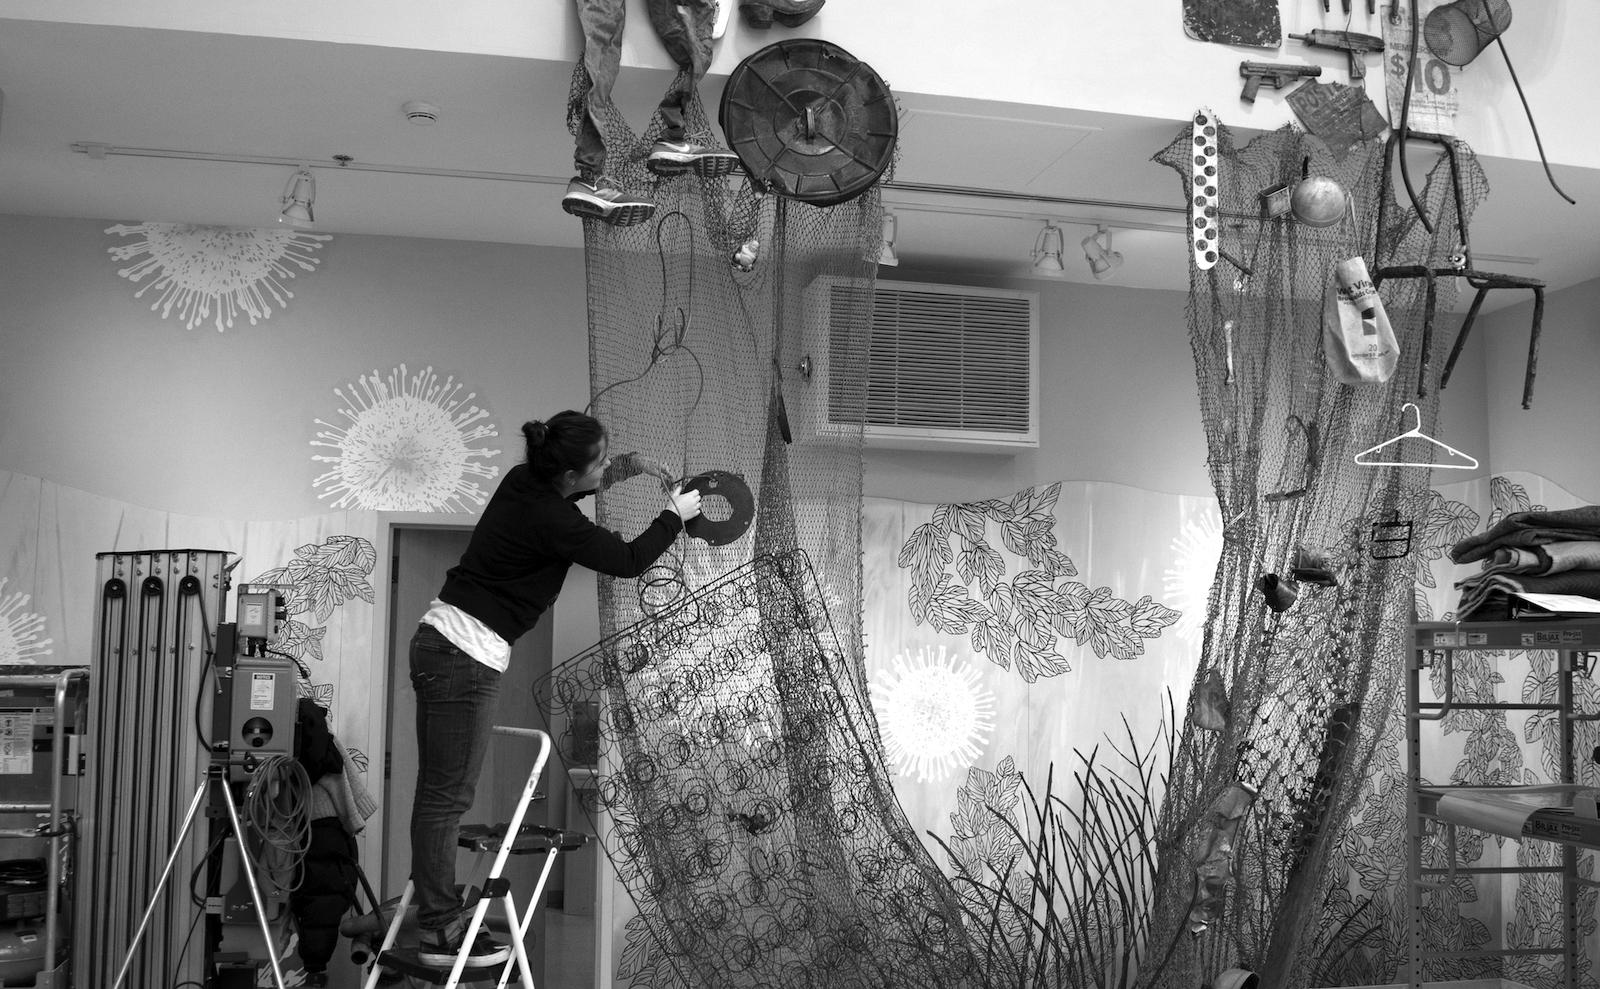 Image of the installation process for River of Trash (2017) at the Turchin Center for Visual Arts in Boone, North Carolina.